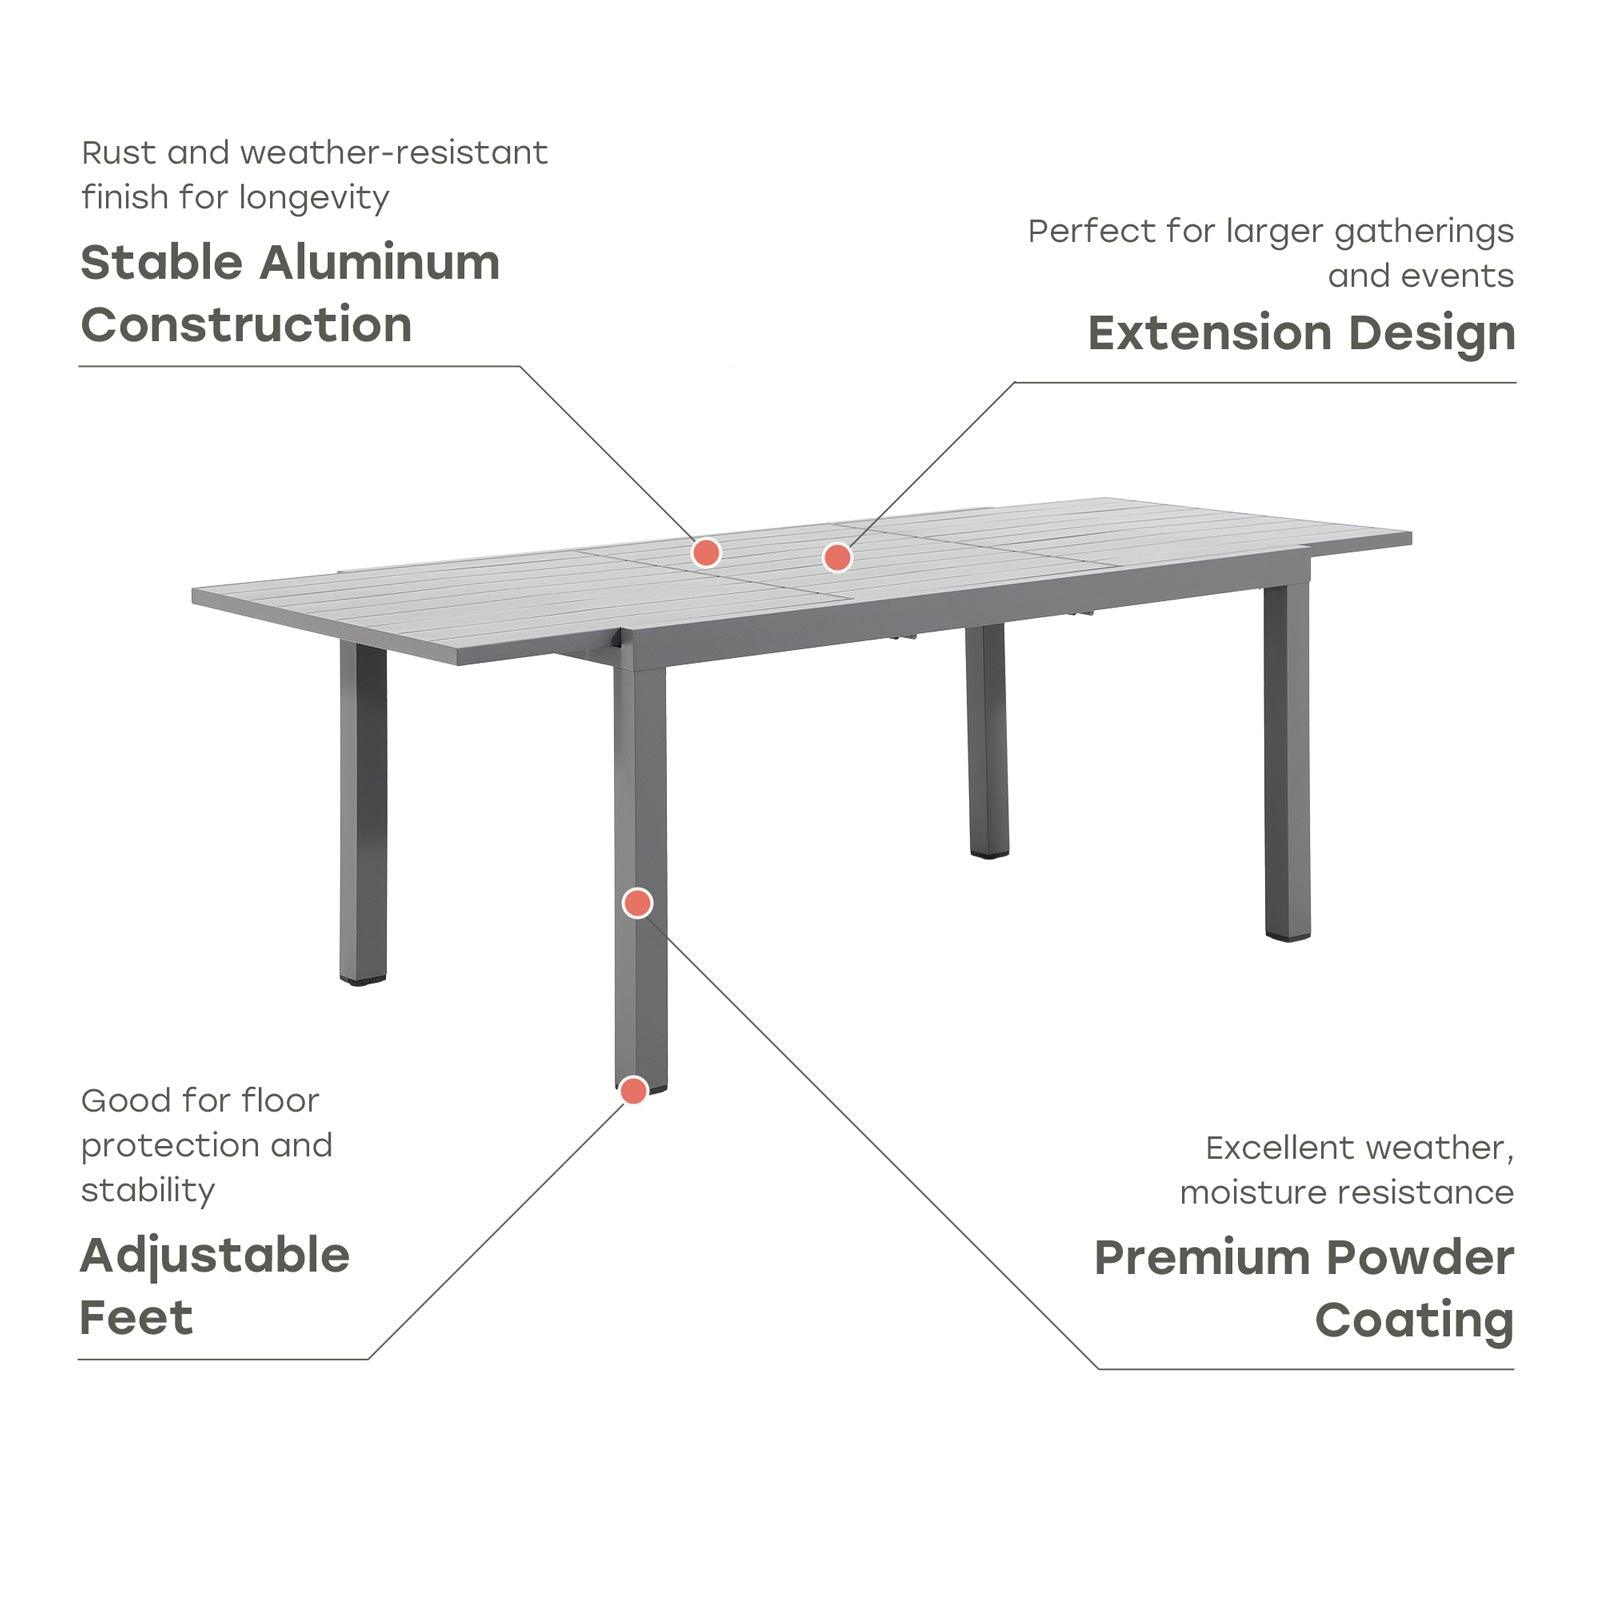 Aluminum frame dining table with extension deisgn, Product Info- Jardina Furniture